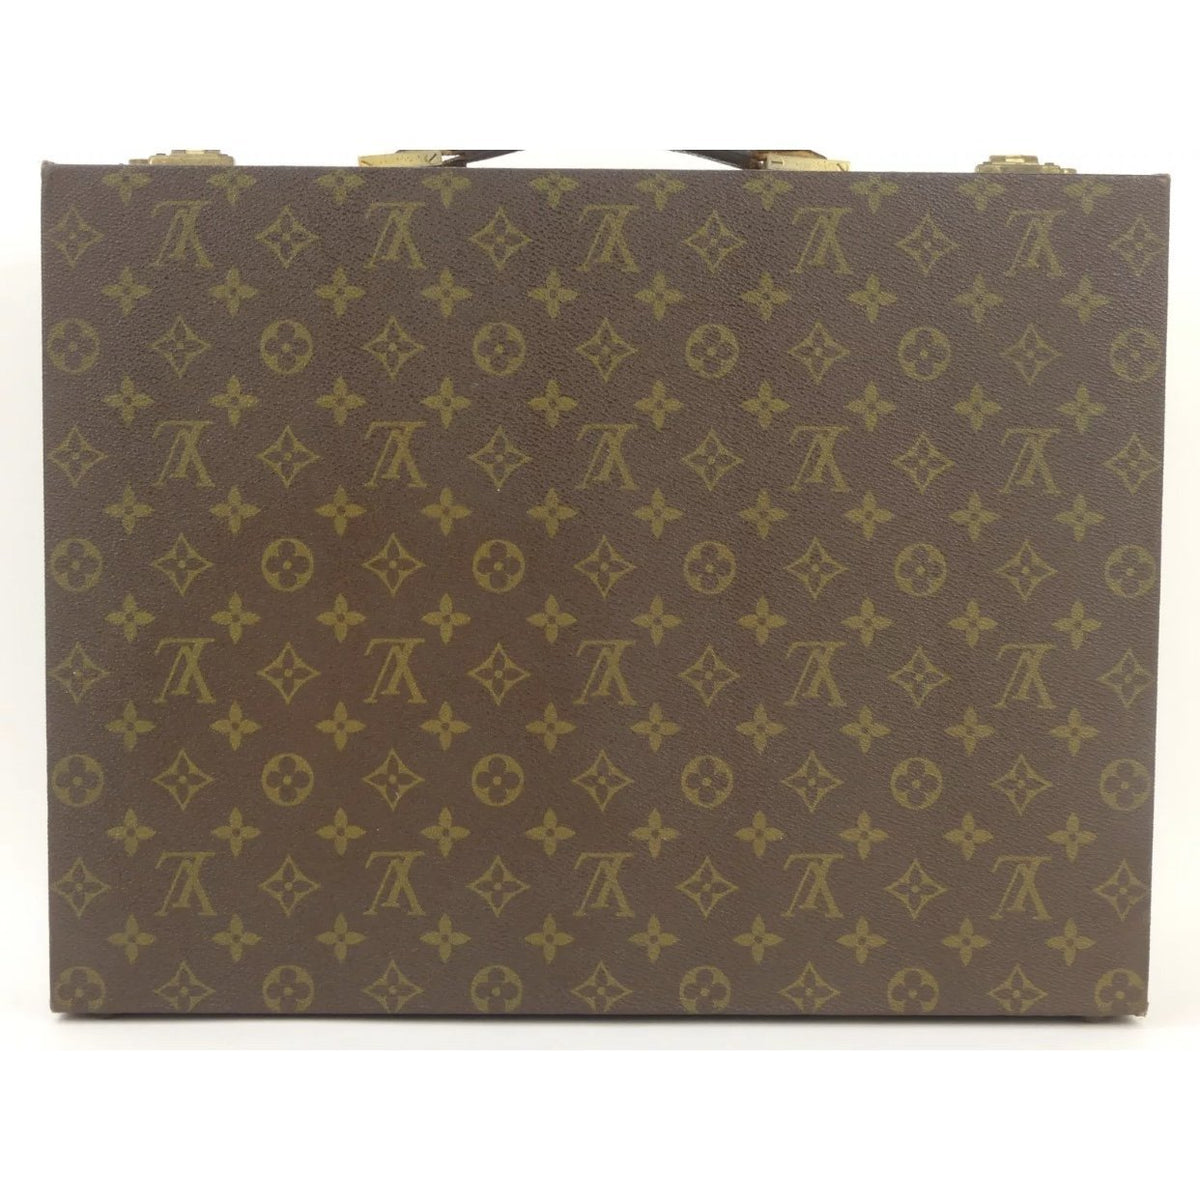 Our version of a briefcase is this Louis Vuitton bag